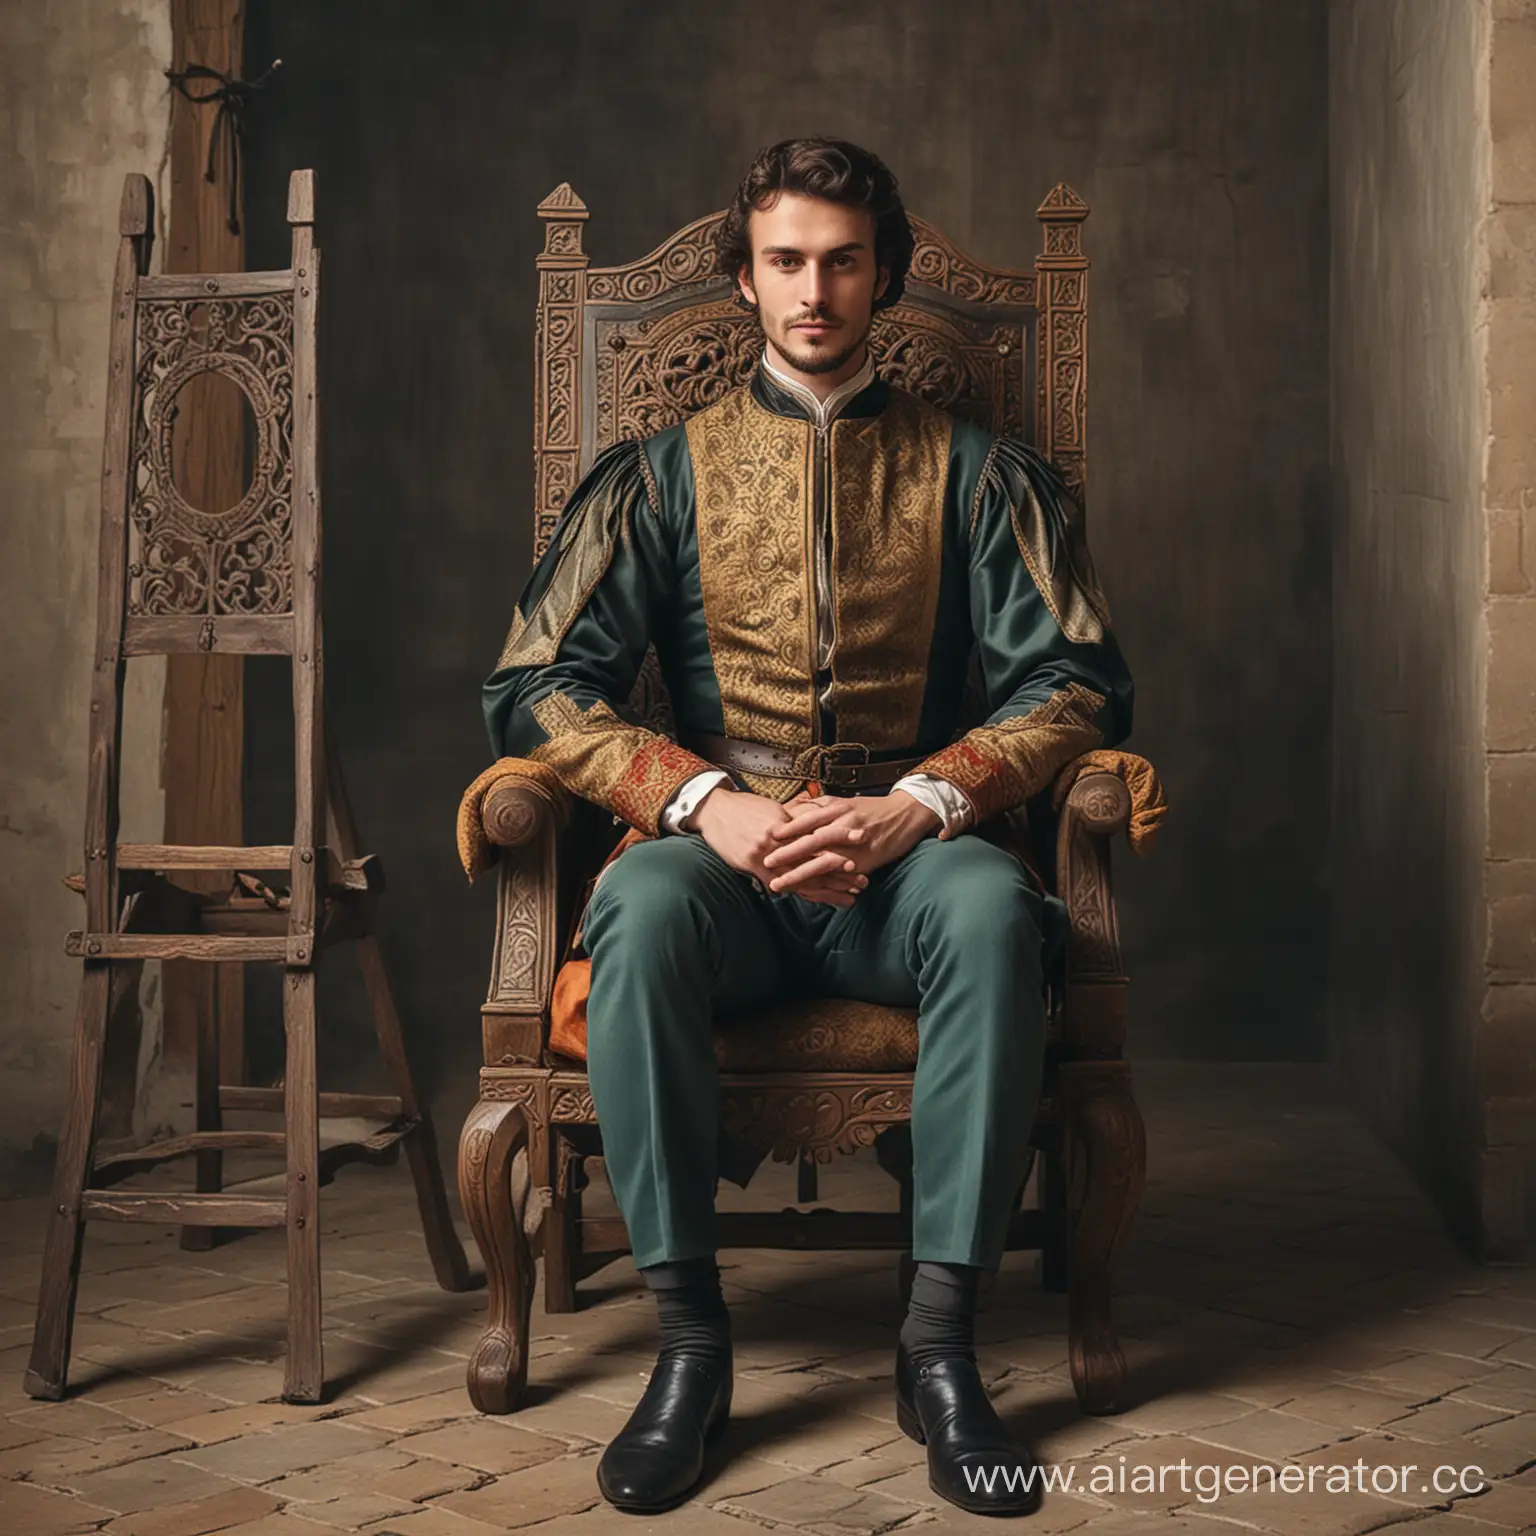 Medieval-Nobleman-Seated-on-Ornate-Chair